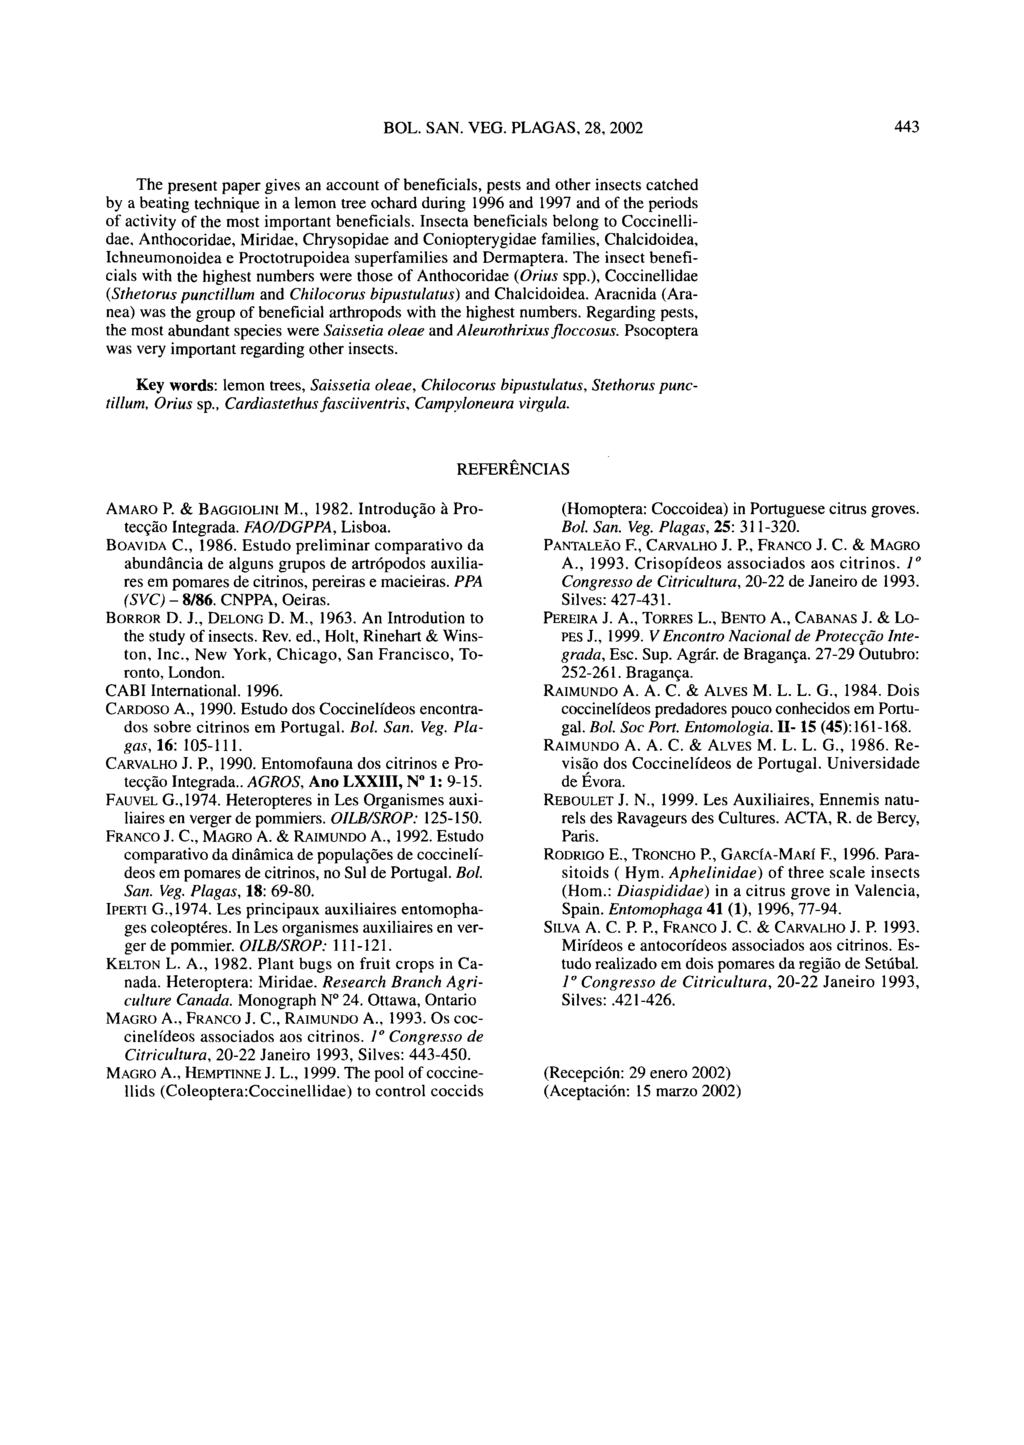 The present paper gives an account of beneficiais, pests and other insects catched by a beating technique in a lemon tree ochard during 1996 and 1997 and of the periods of activity of the most